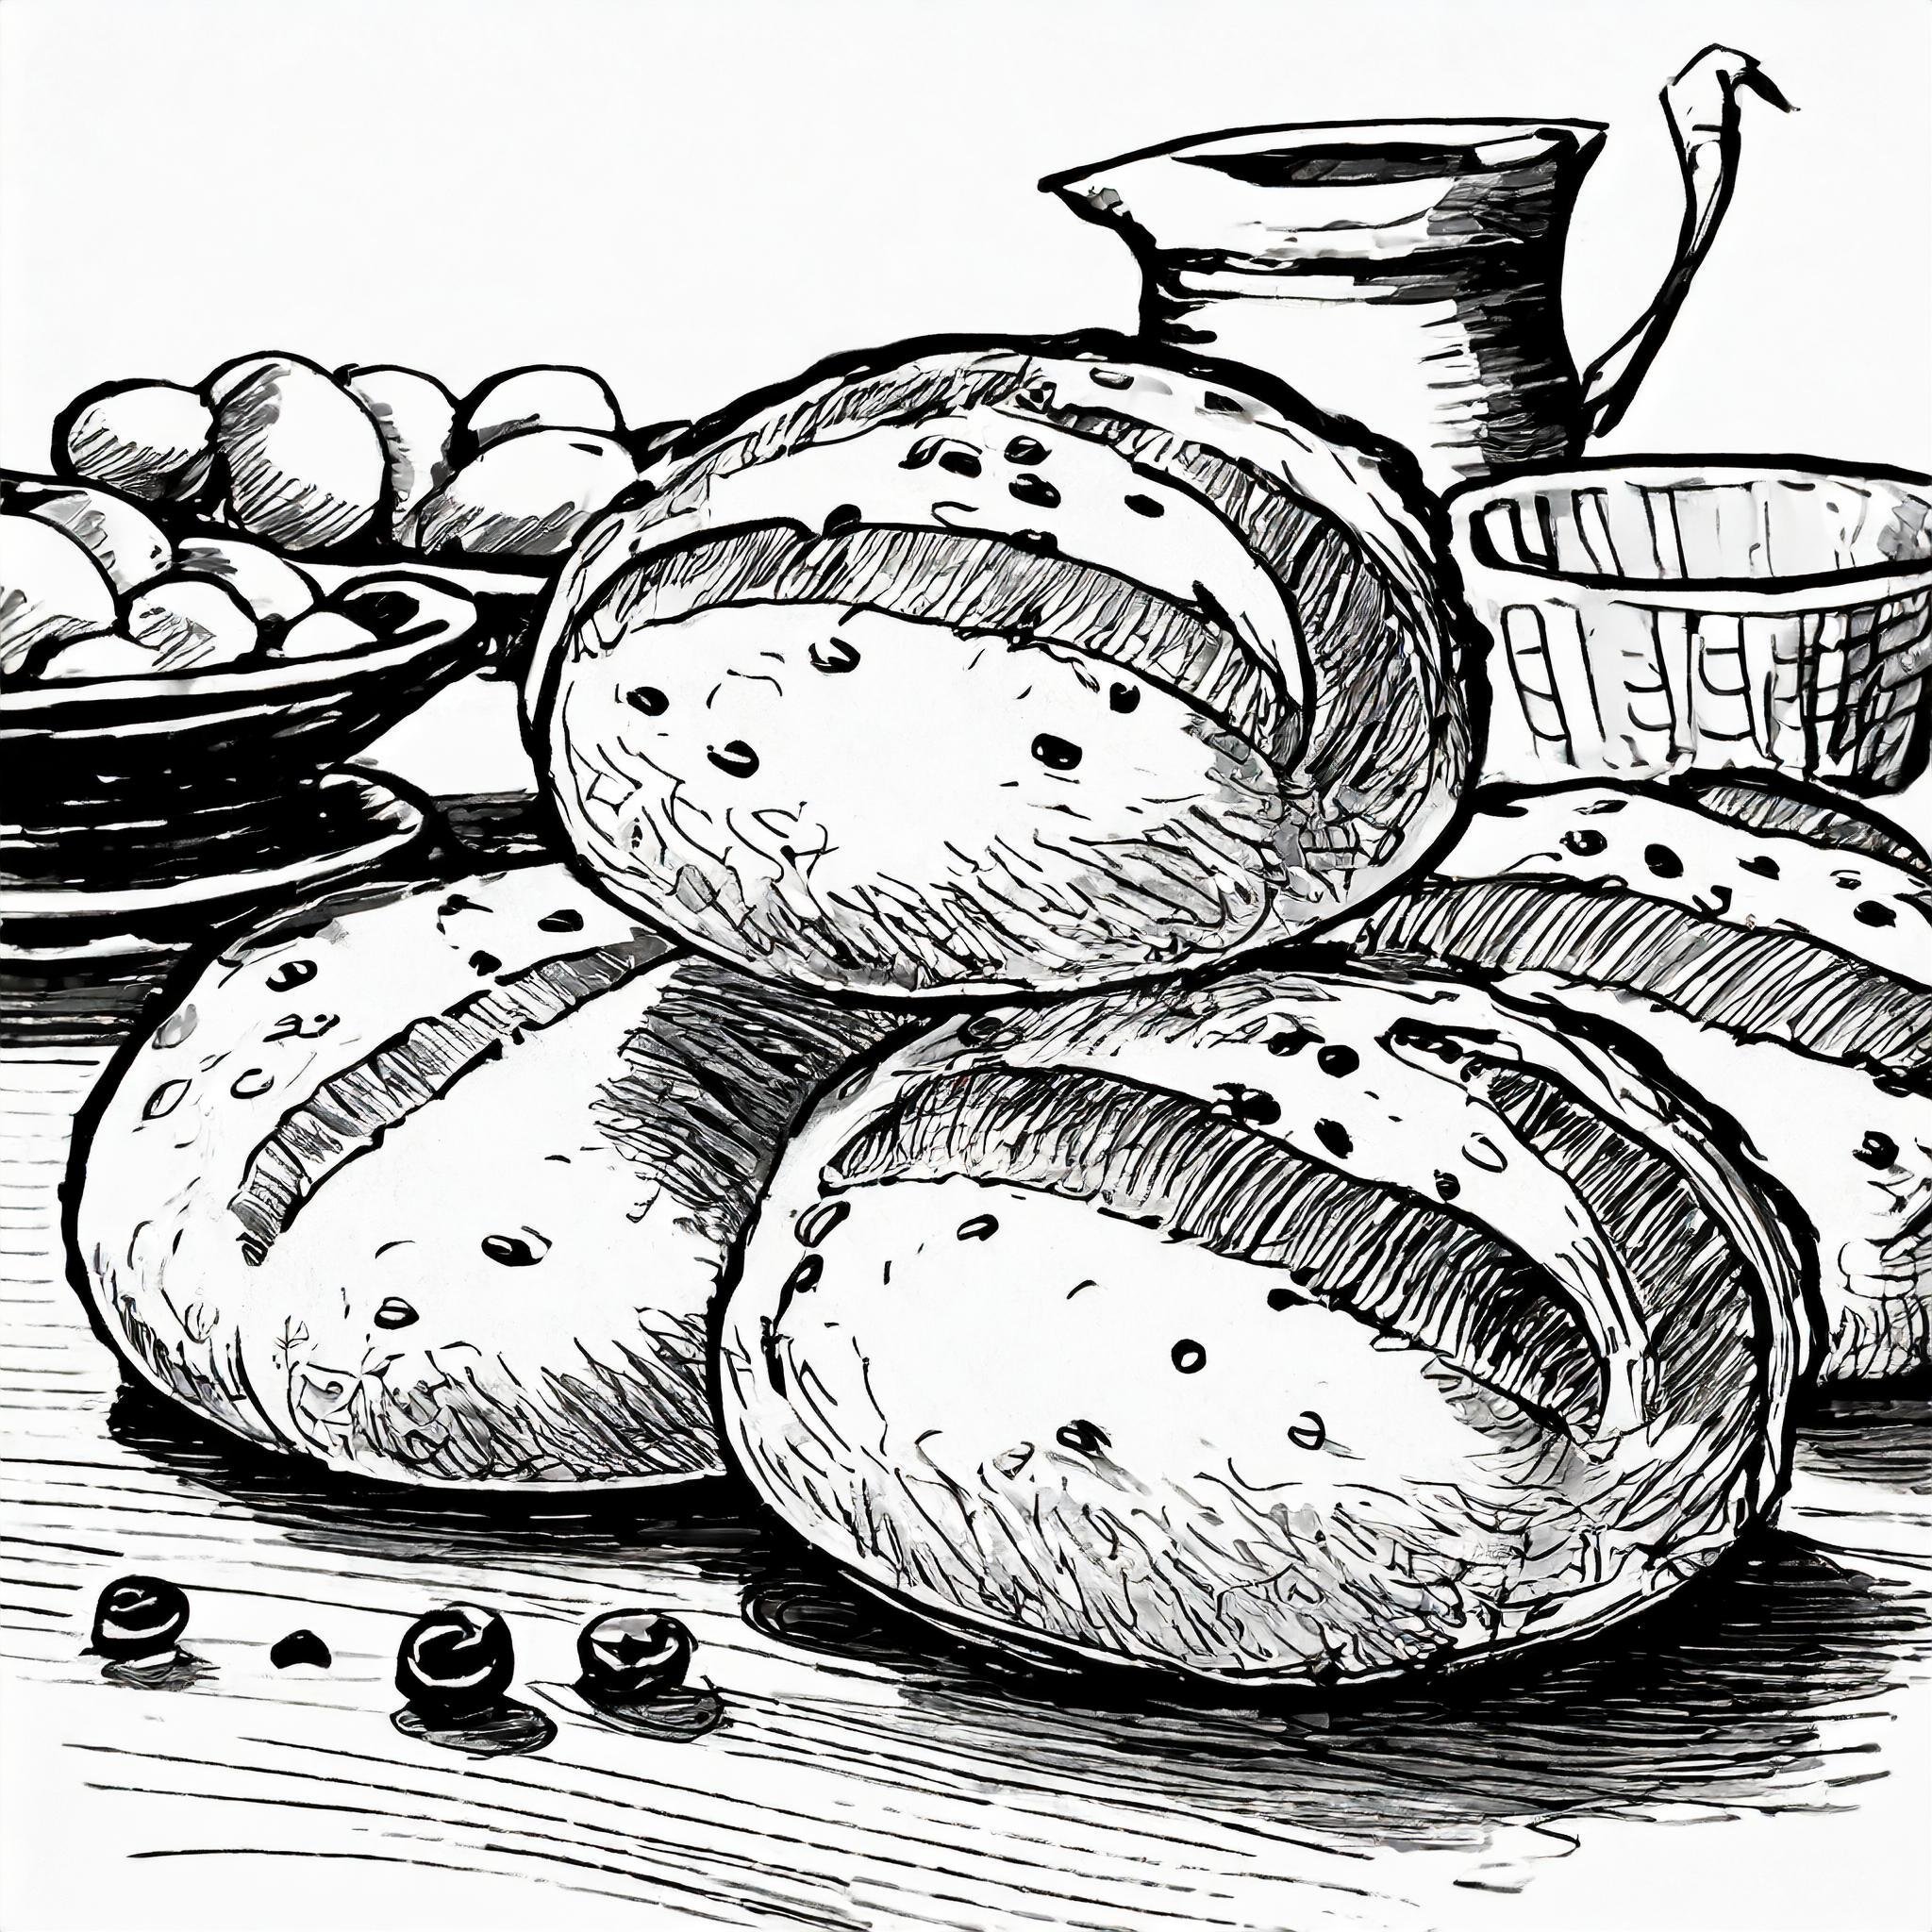 3 bread roll, focus in foreground with other items on background, Anfang der vierziger Jahre